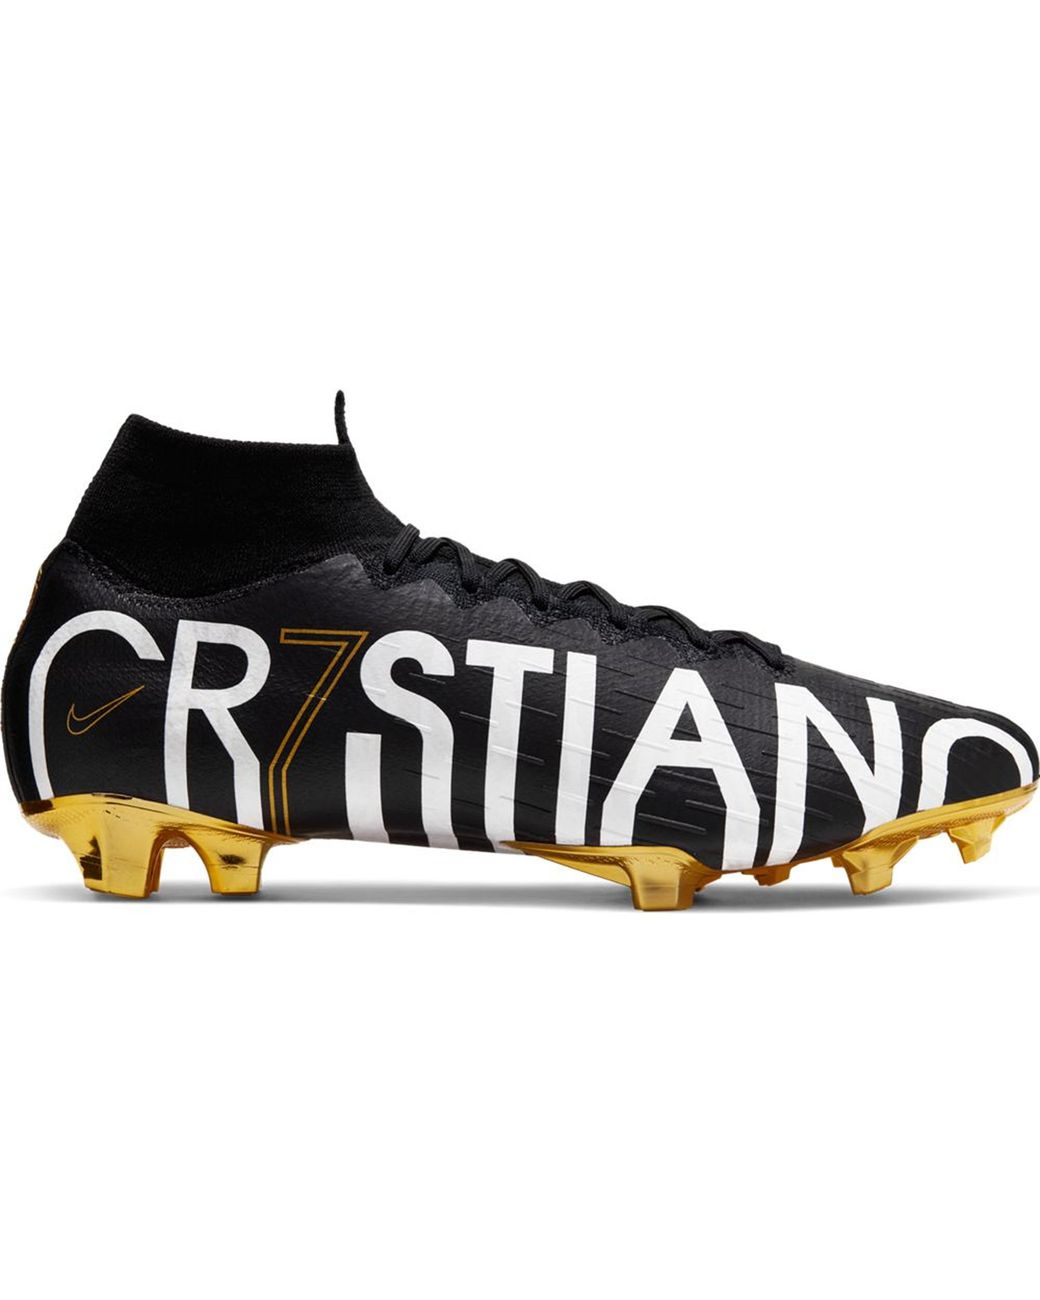 Nike Mercurial Superfly 6 Elite Cr7 Special Edition Fg Firm-ground Football  Boot in Black/Vivid Gold (Black) for Men - Save 51% - Lyst